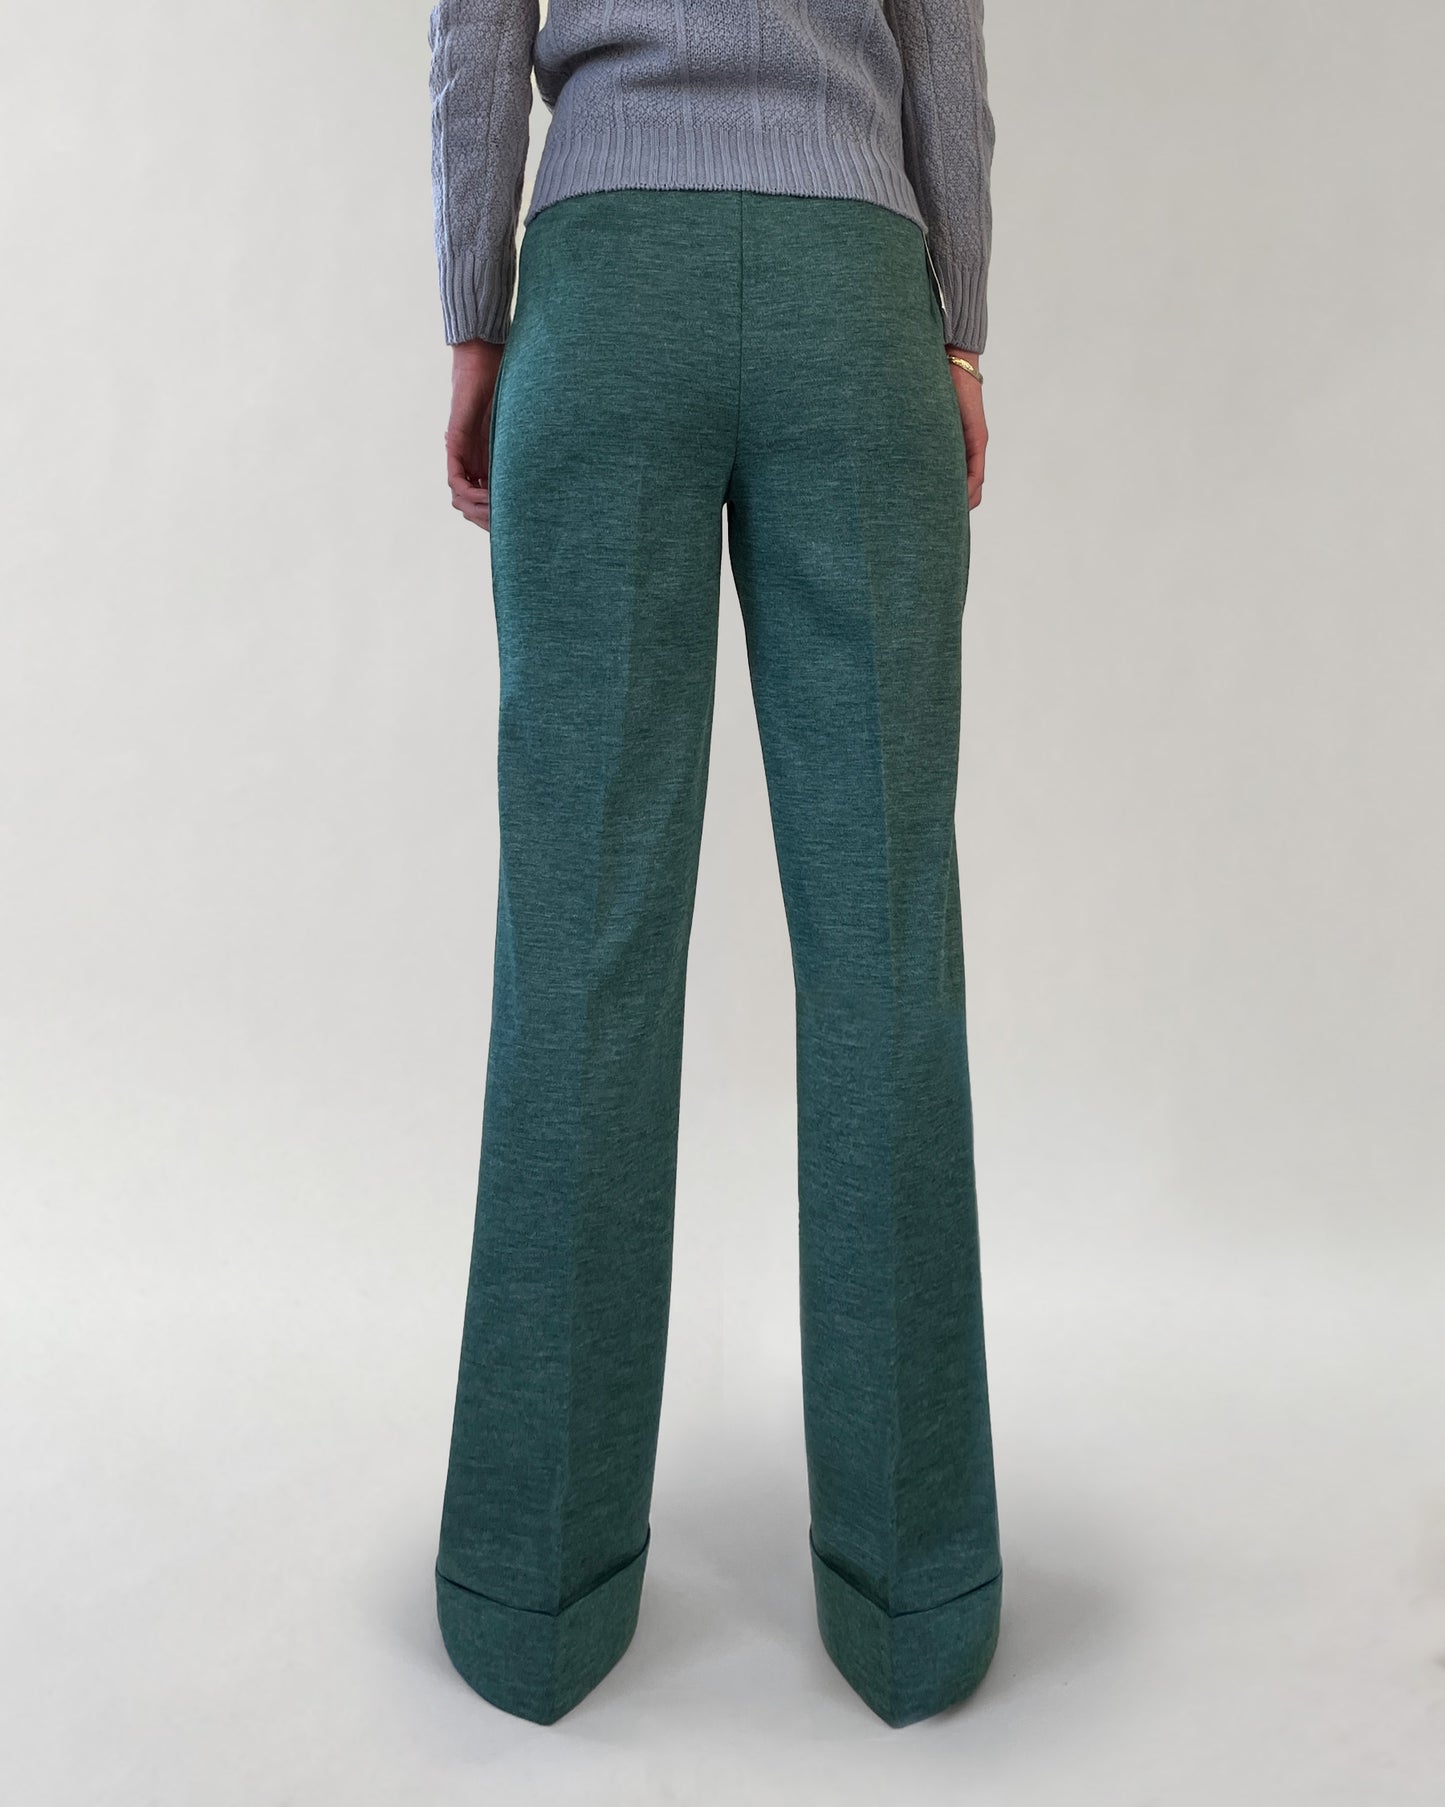 NOS 70's Poly Flare Pants